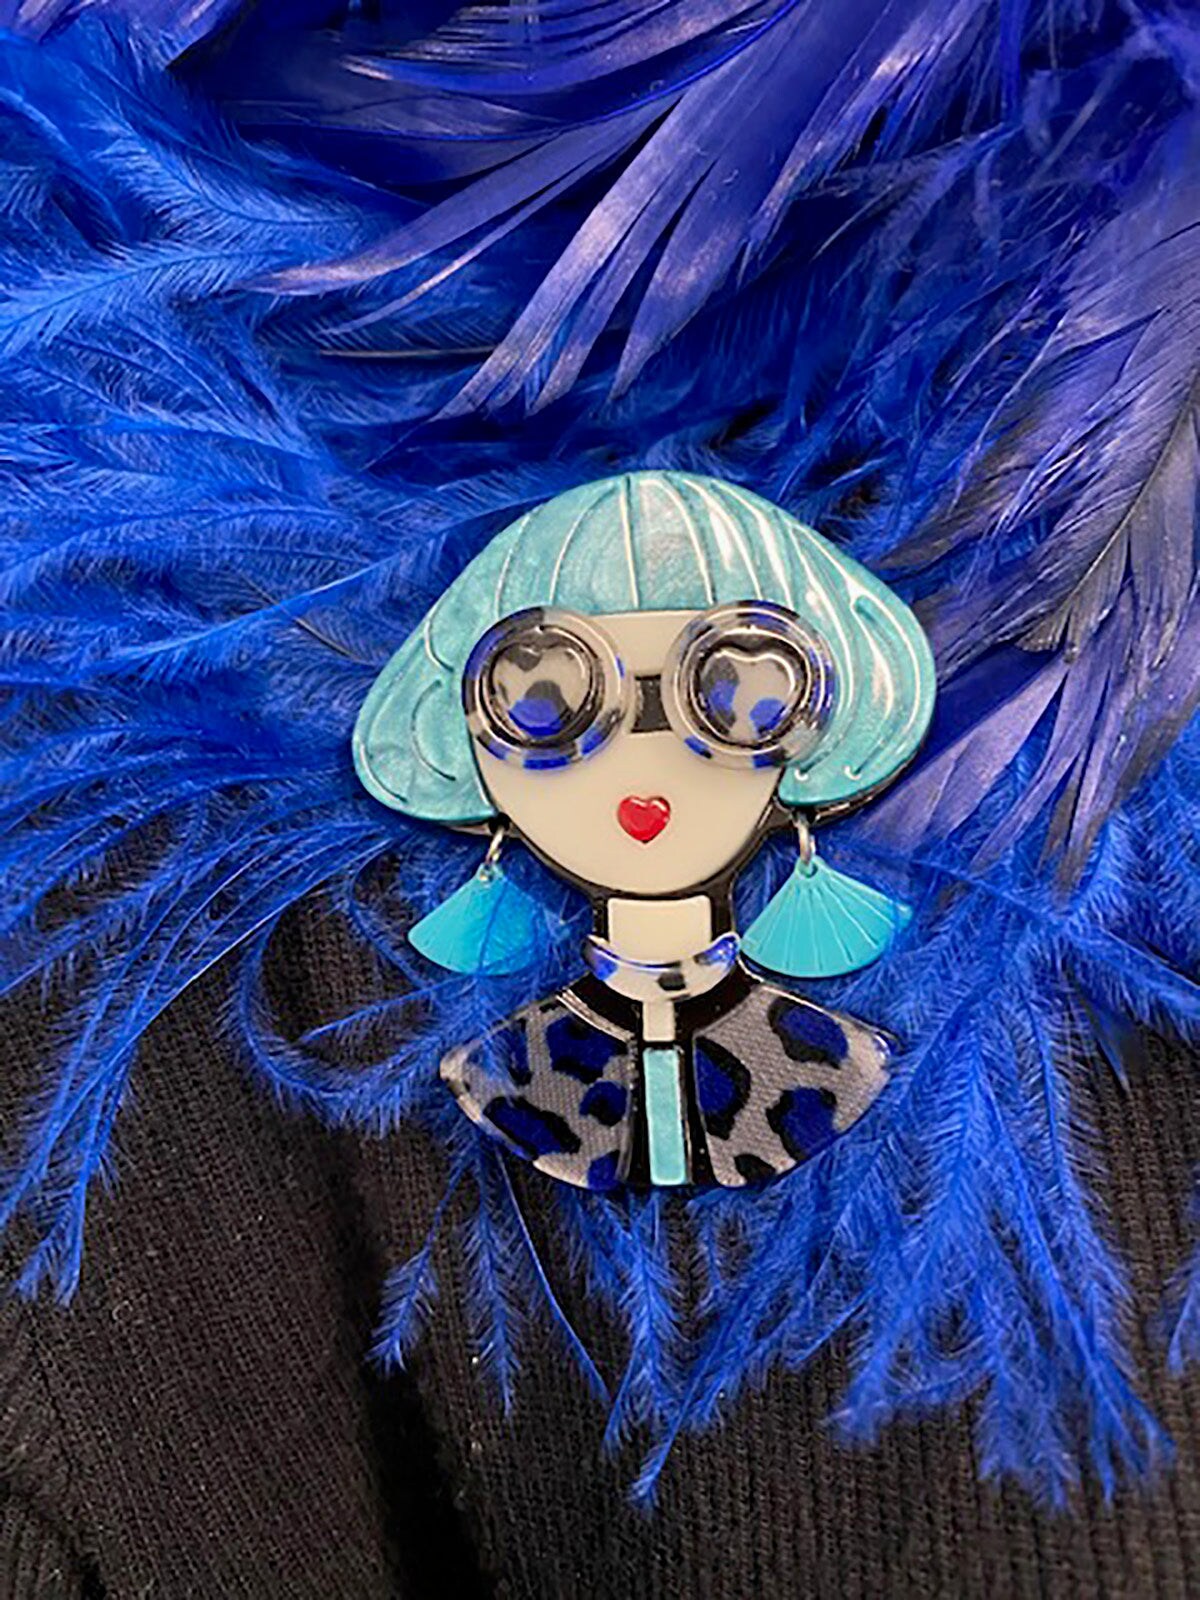 Wrapables Acrylic Fashion Brooch Pin for Sweaters, Coats, Scarves, and Bags, Quirky Blue